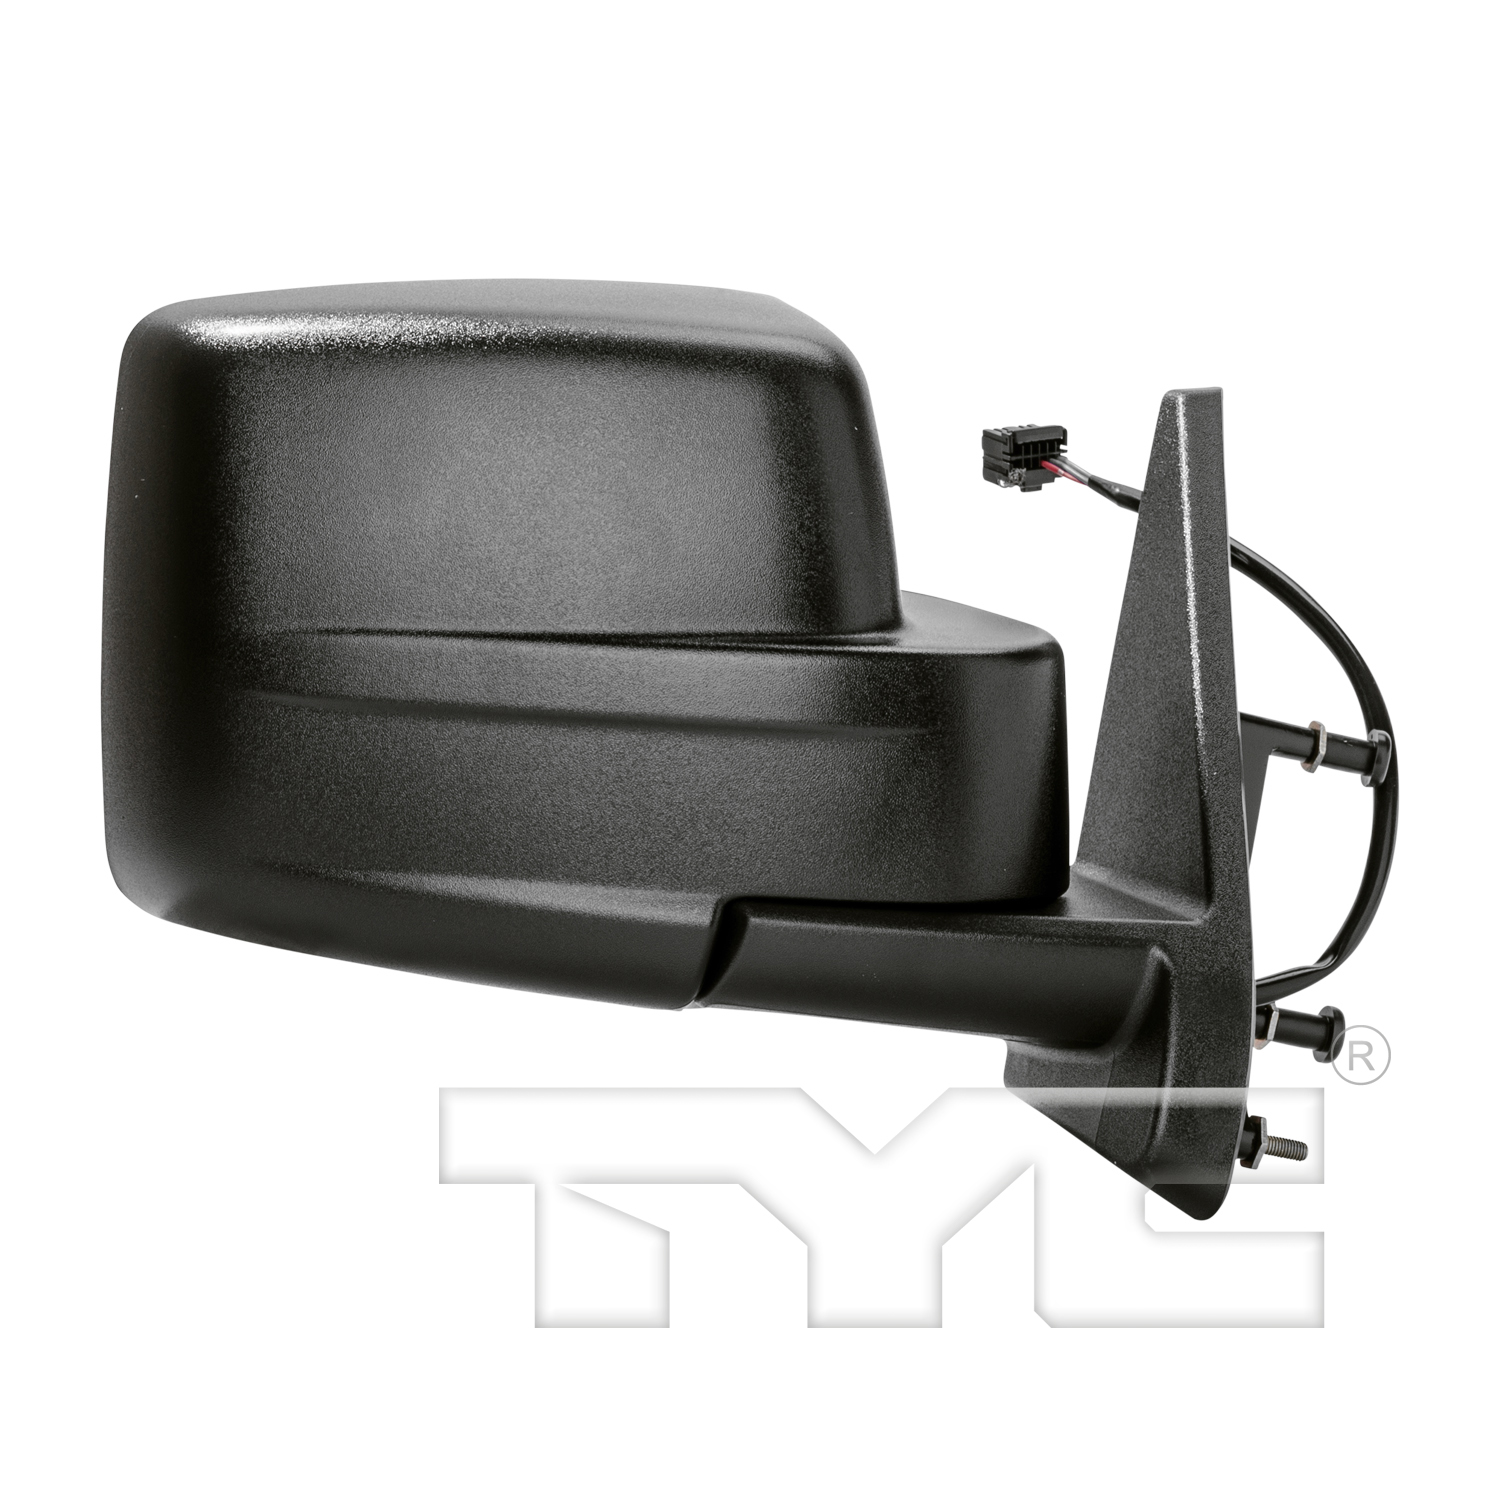 Aftermarket MIRRORS for JEEP - PATRIOT, PATRIOT,07-09,RT Mirror outside rear view